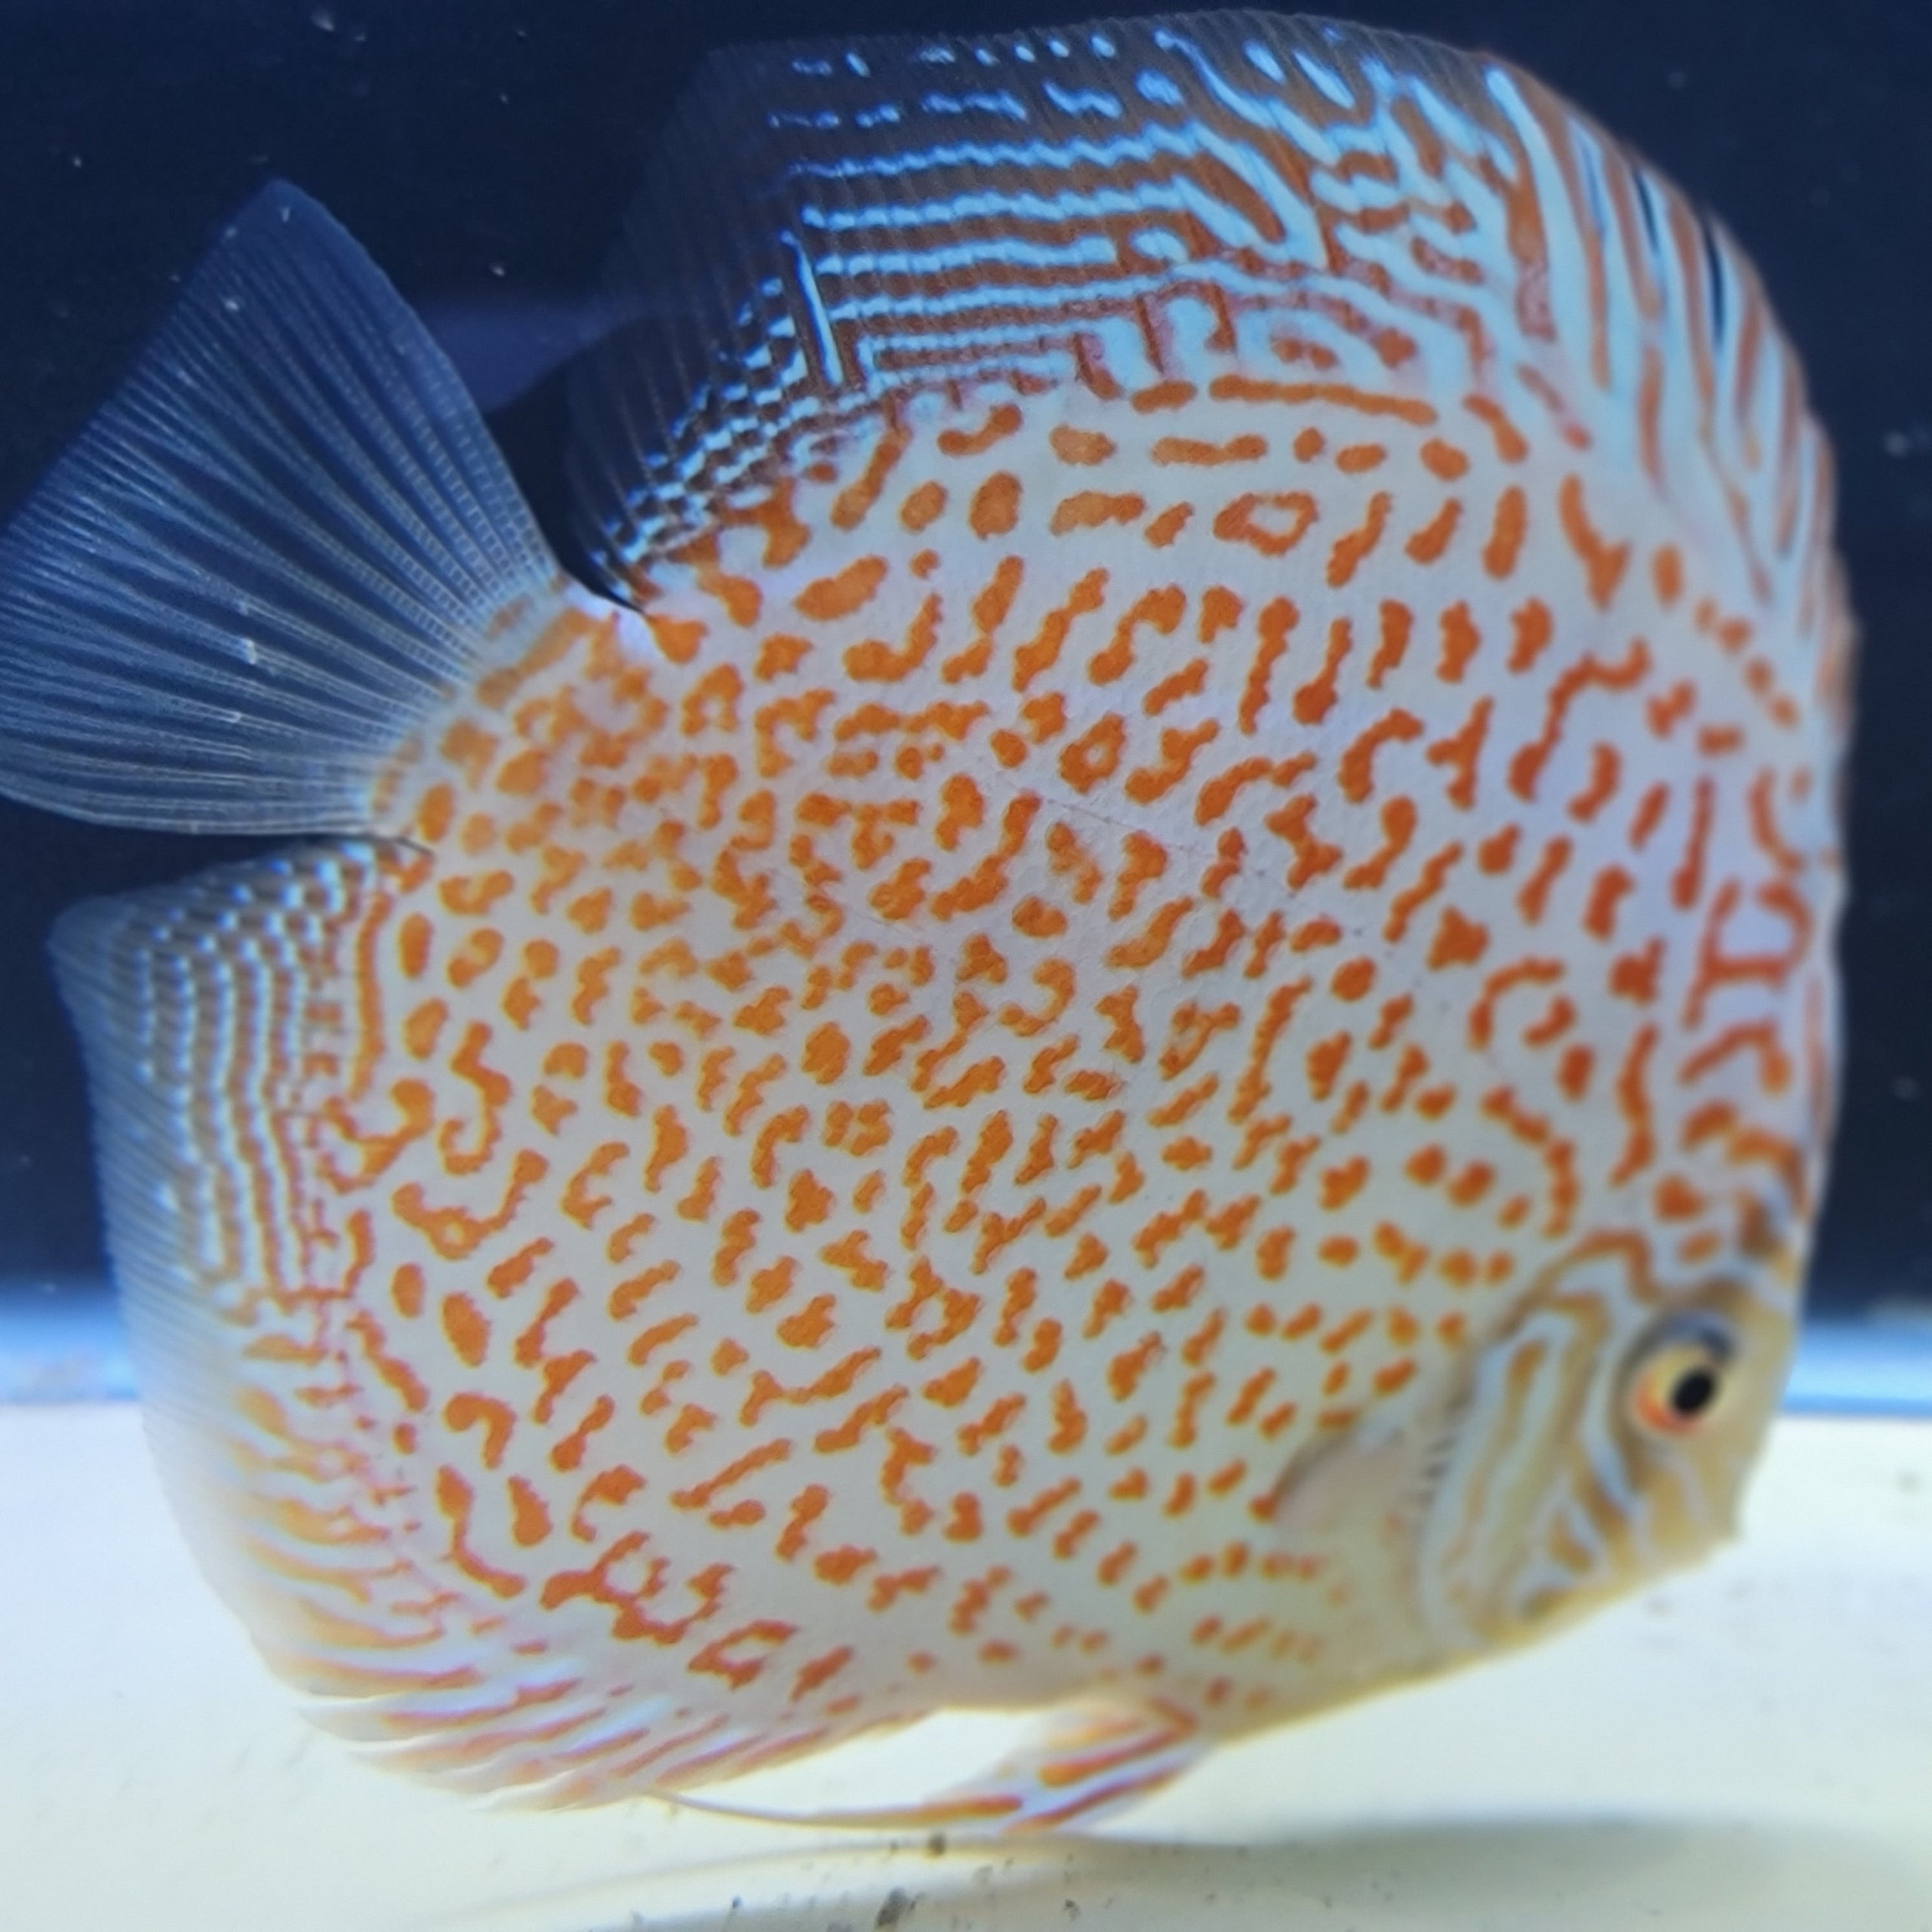 Ring Leopard Discus Fish 5 inches | Specialized Discus Fish Store in ...